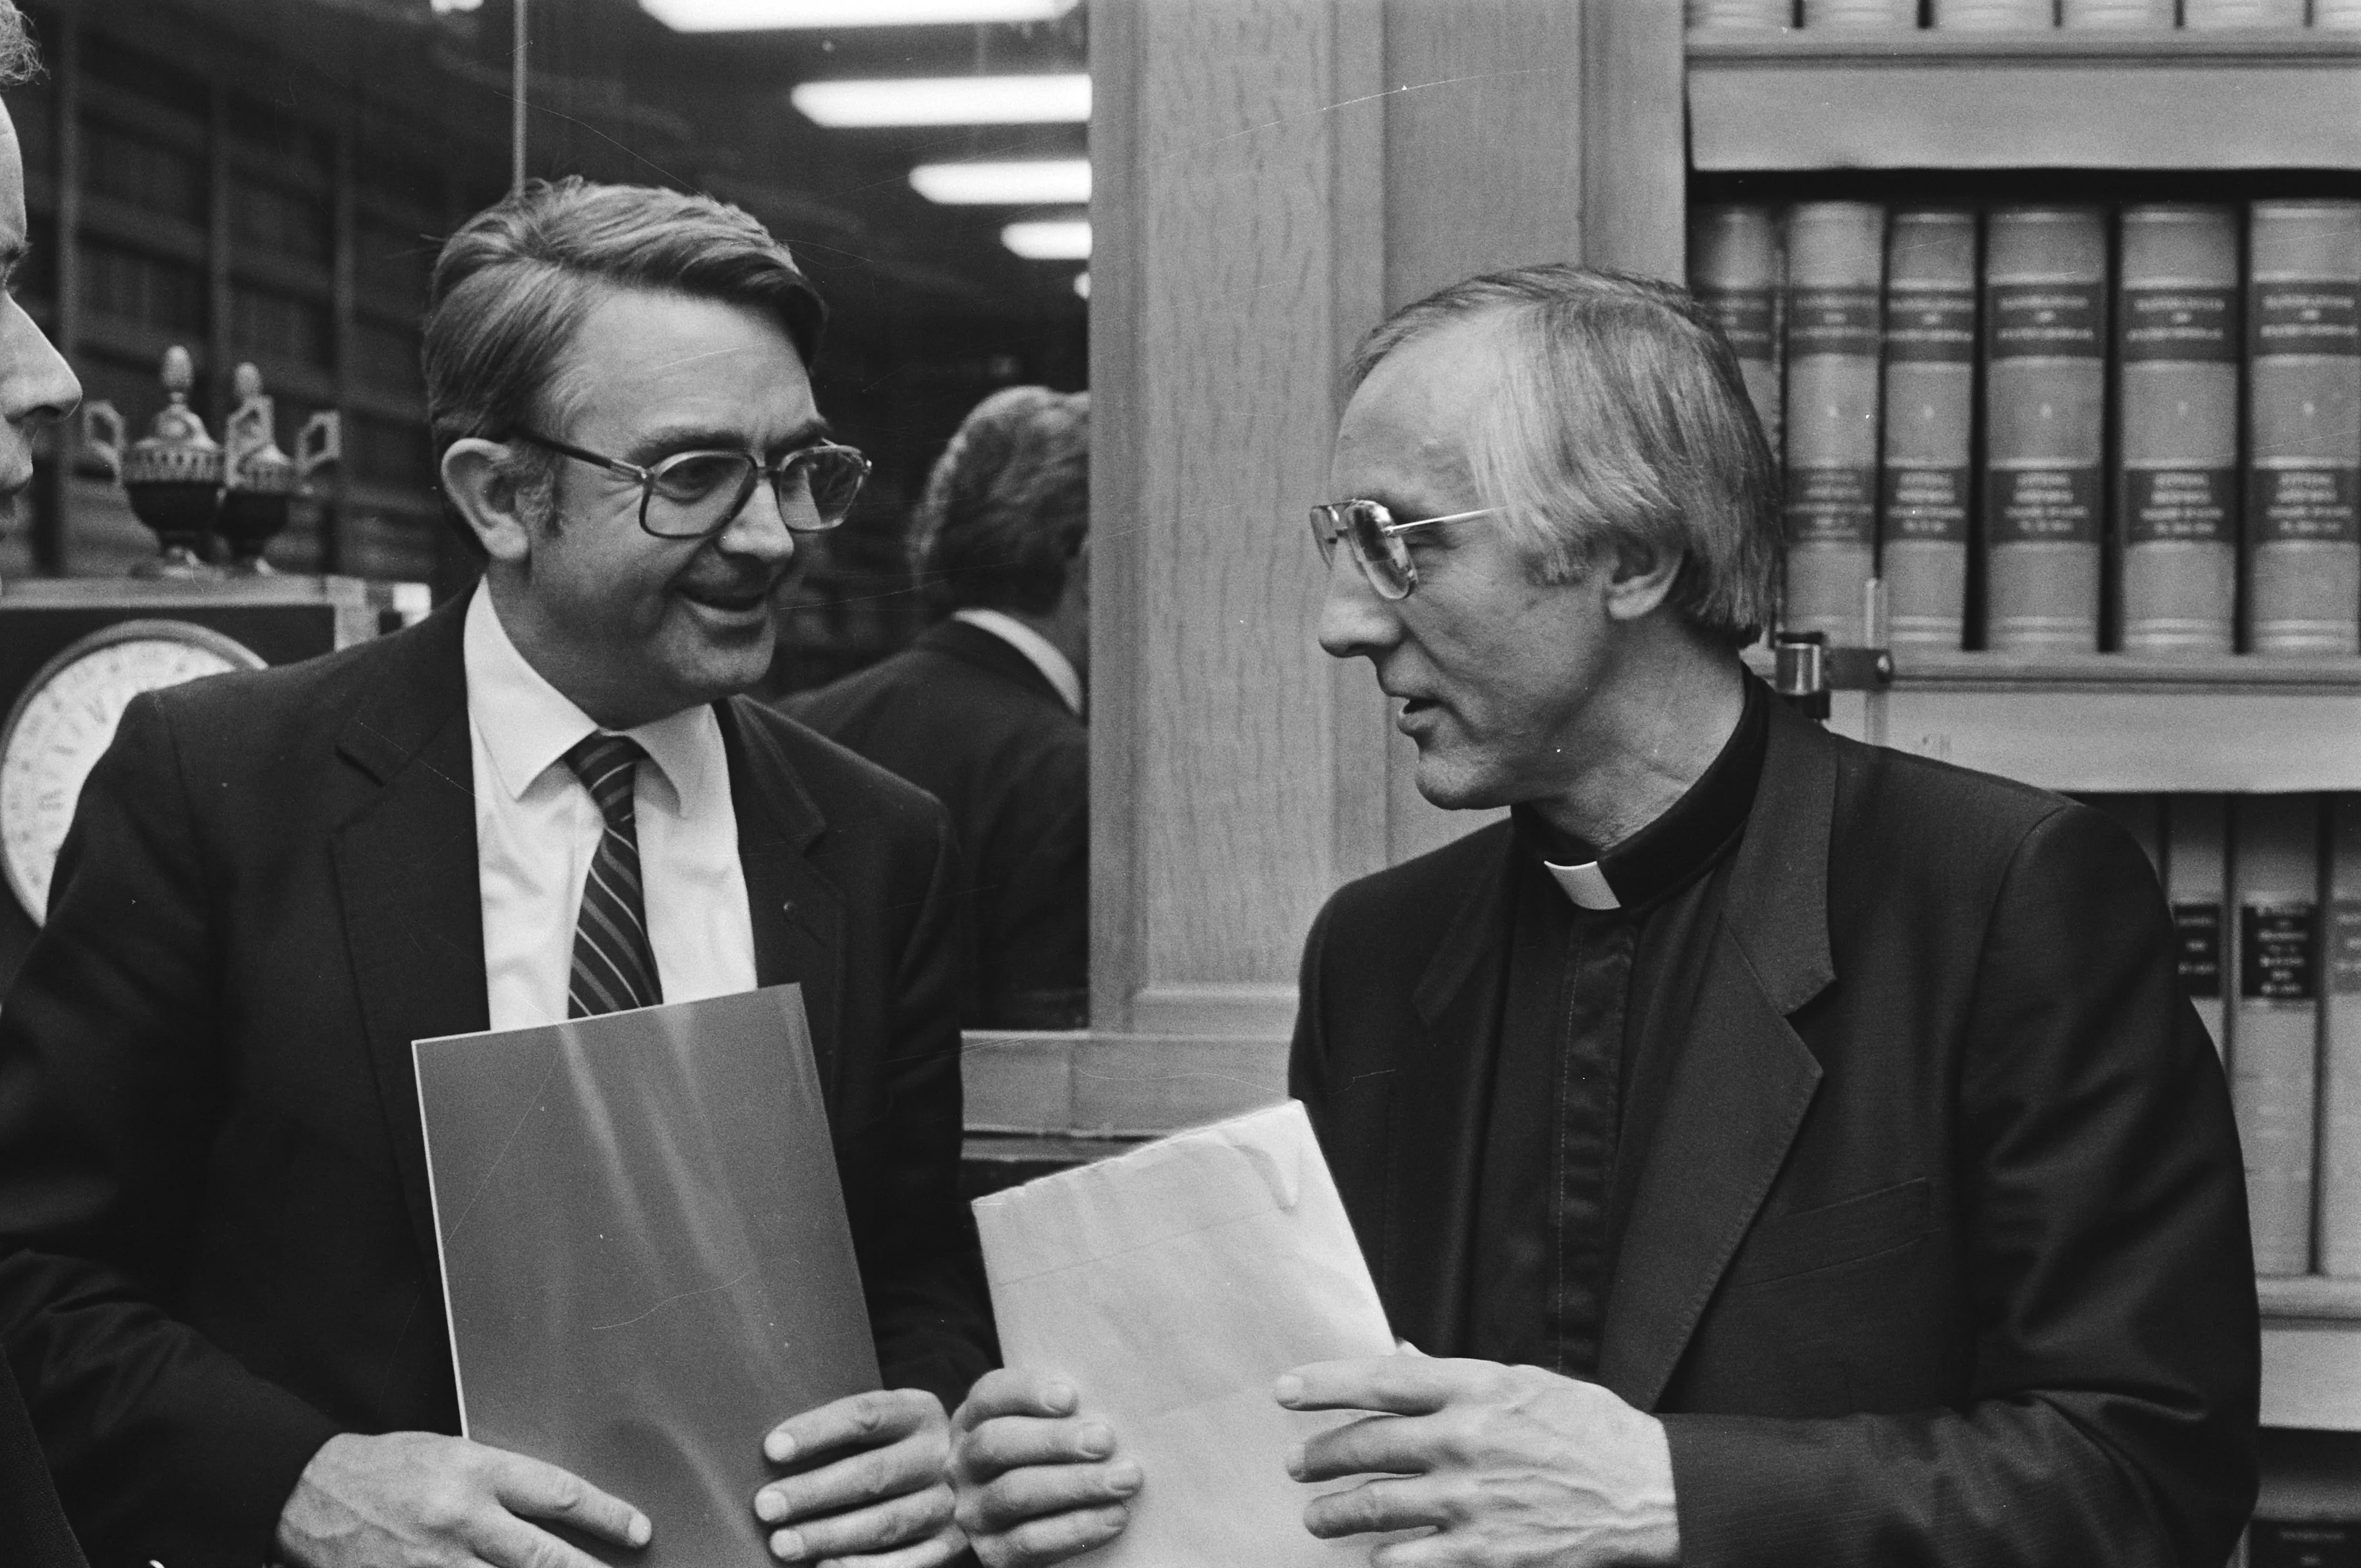 Former Auxiliary Bishop Thomas Gumbleton (right) meets with legislators in the Netherlands in 1983.?w=200&h=150